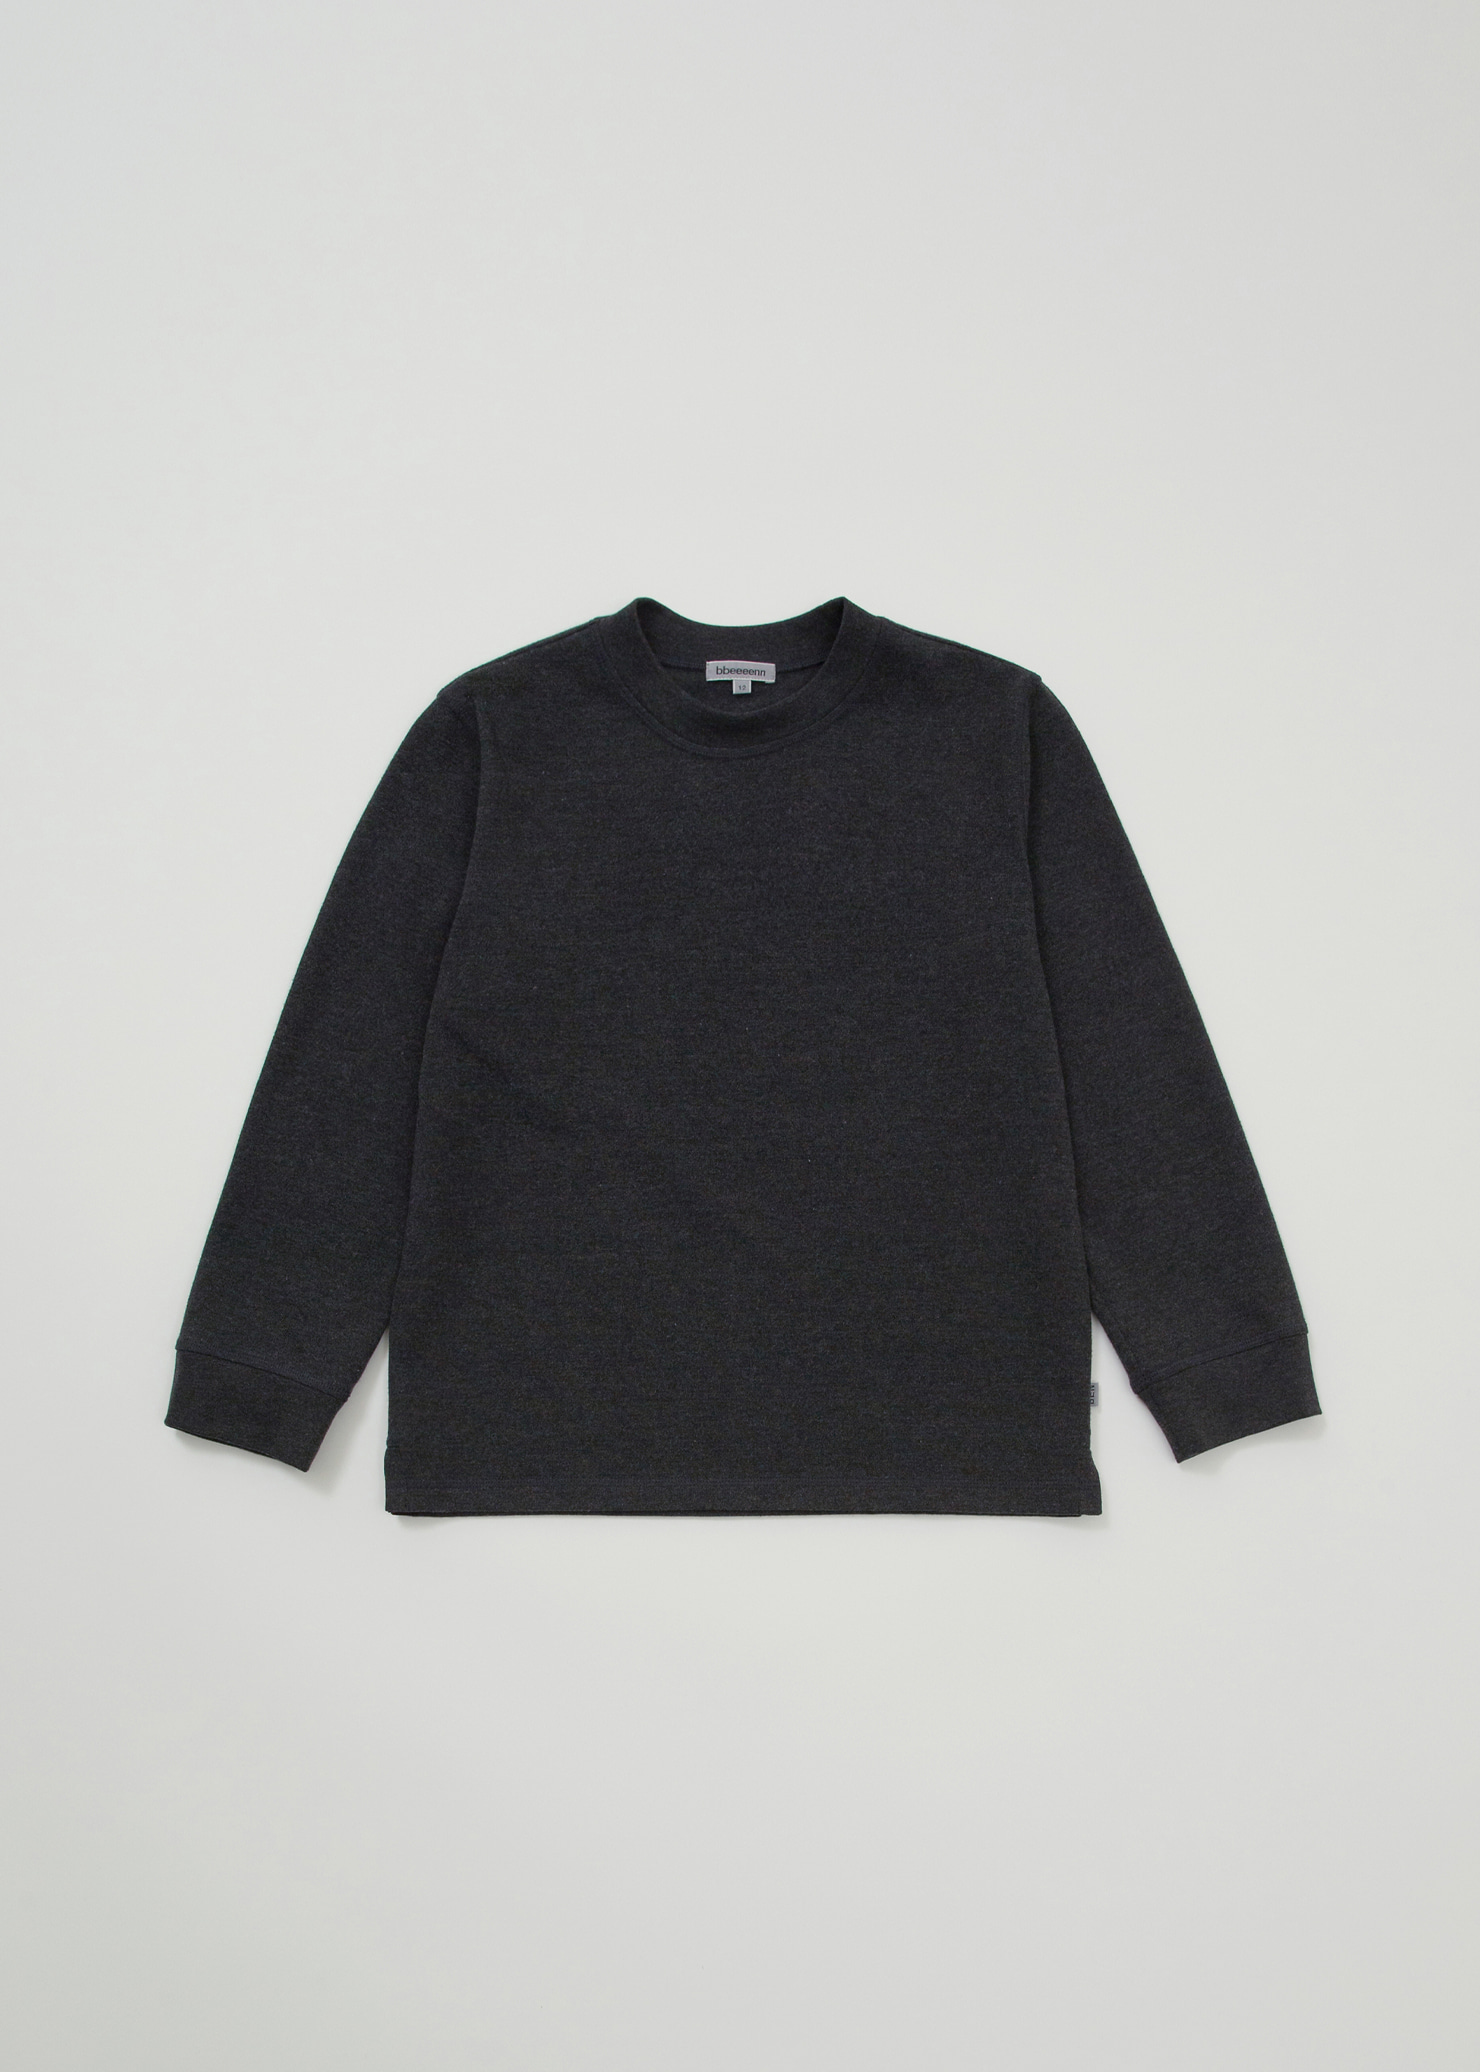 Ribbed Sleeve T _ Charcoal